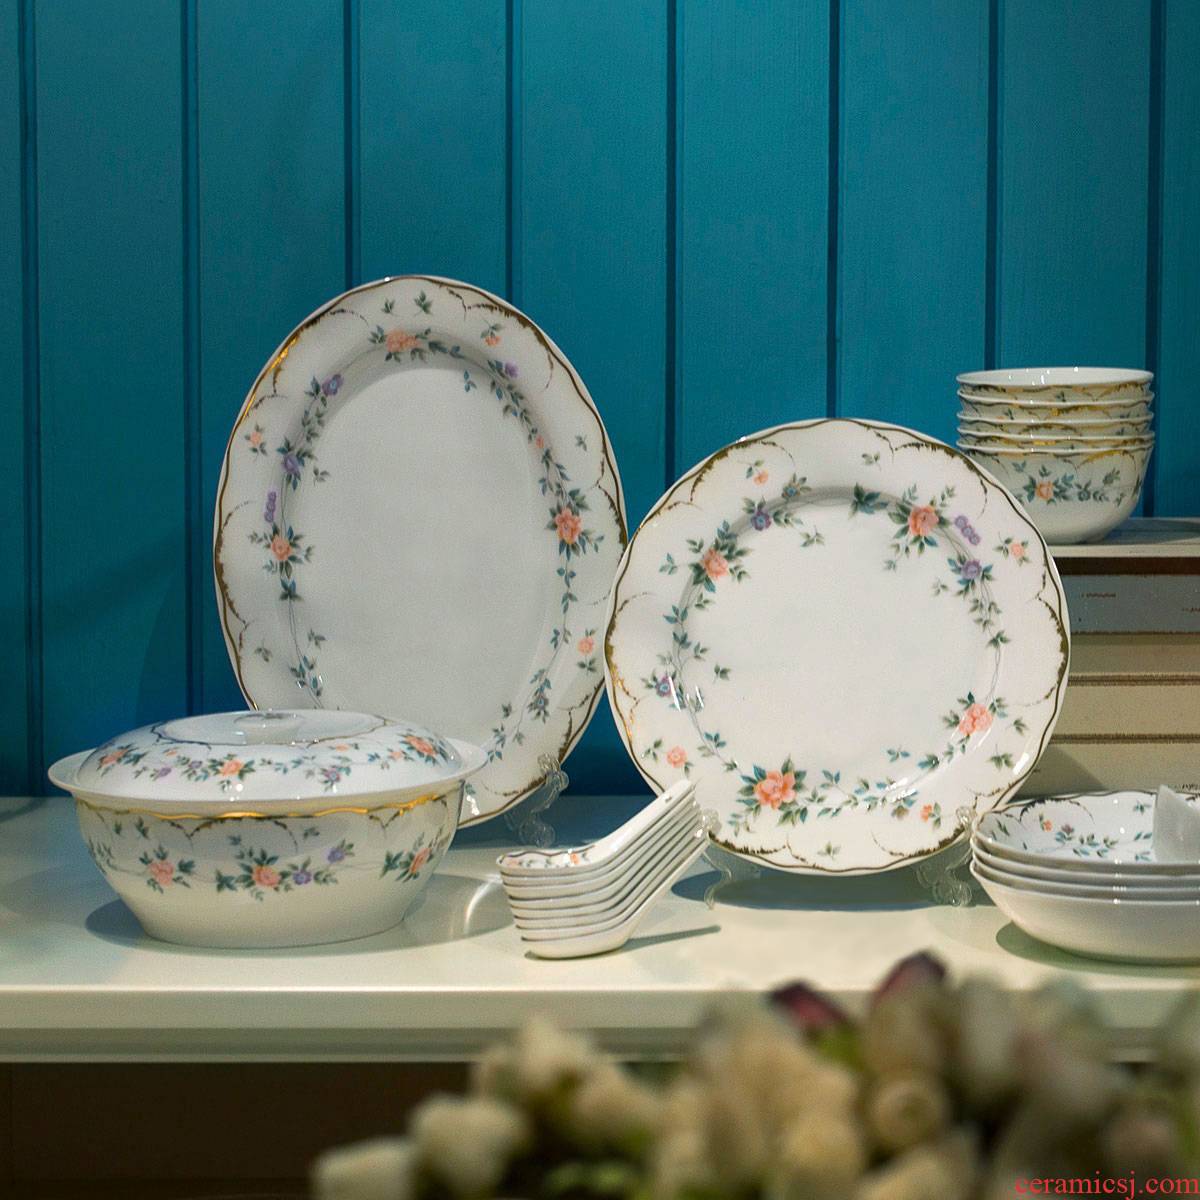 Old porcelain artisan dishes suit jingdezhen daily use ceramics - European tableware suit ipads bowls set tableware bag in the mail